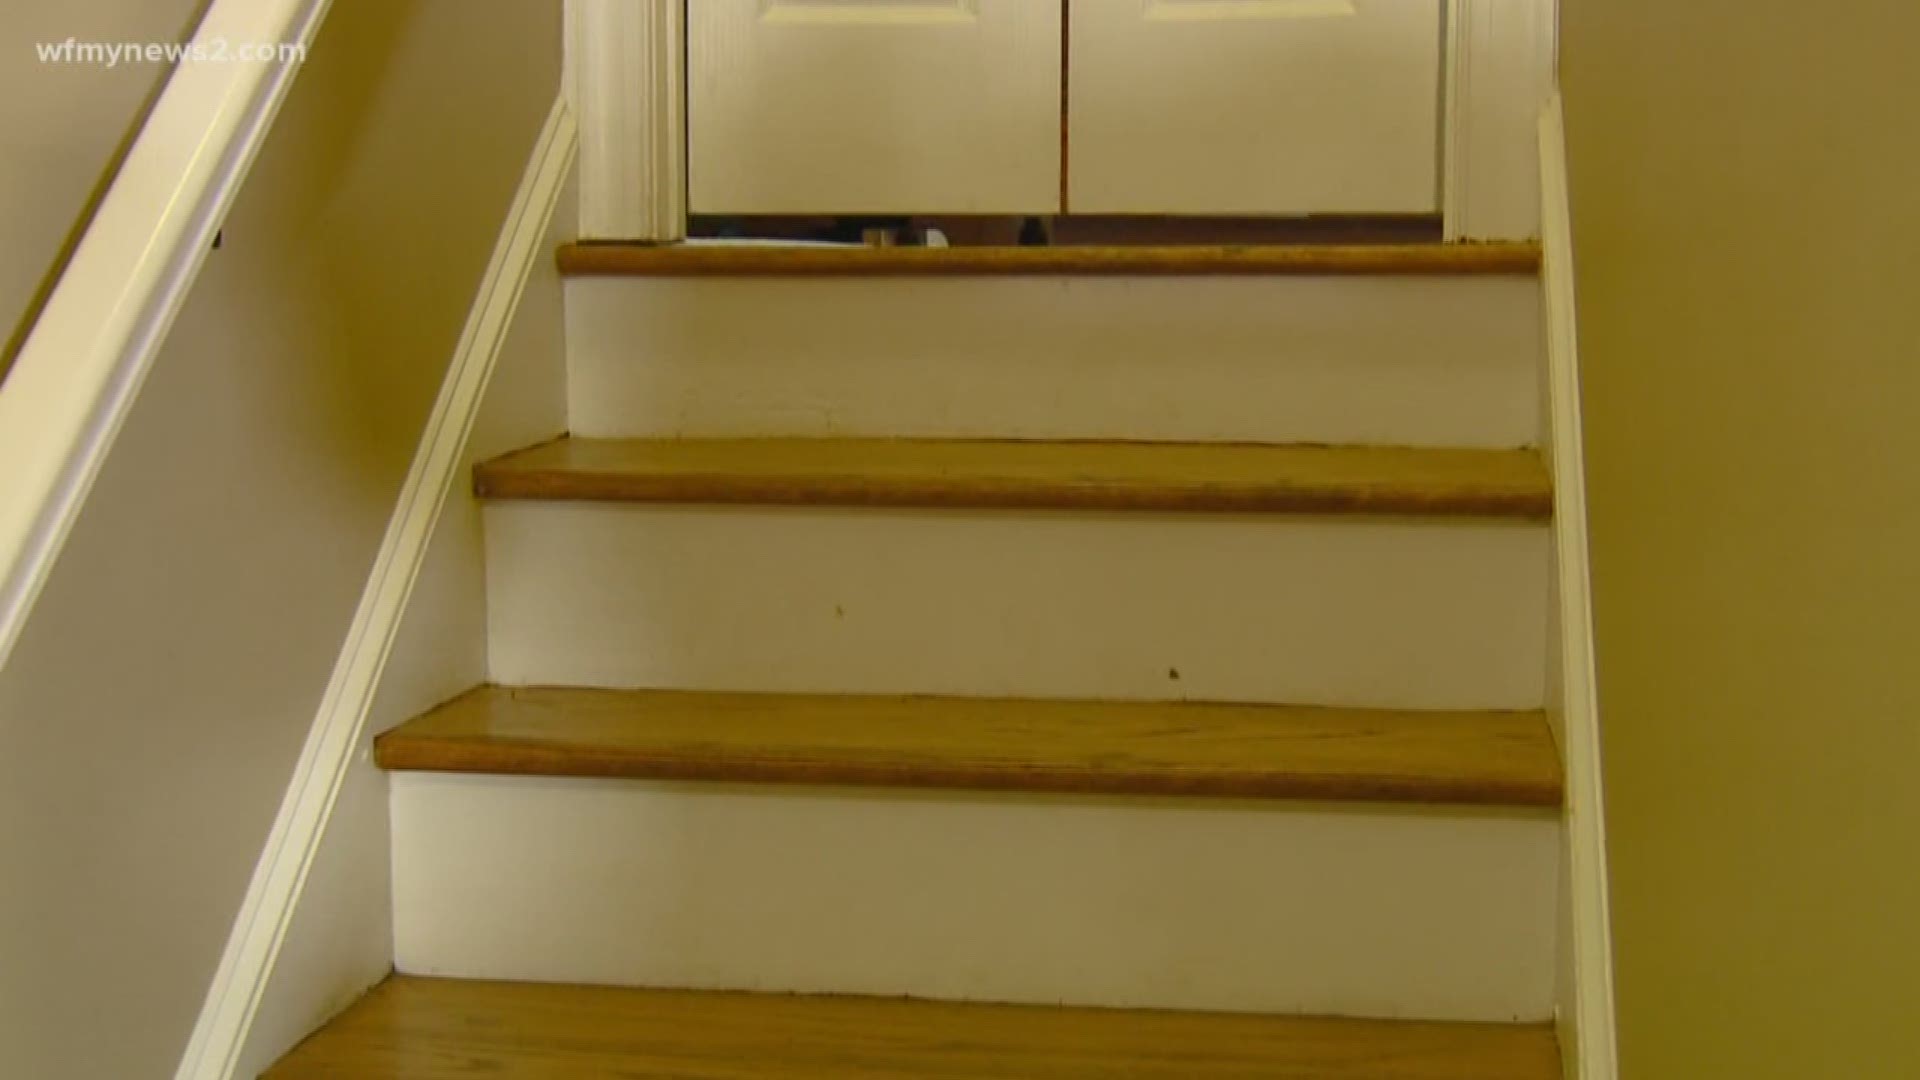 Caregiving 101: Stair Safety